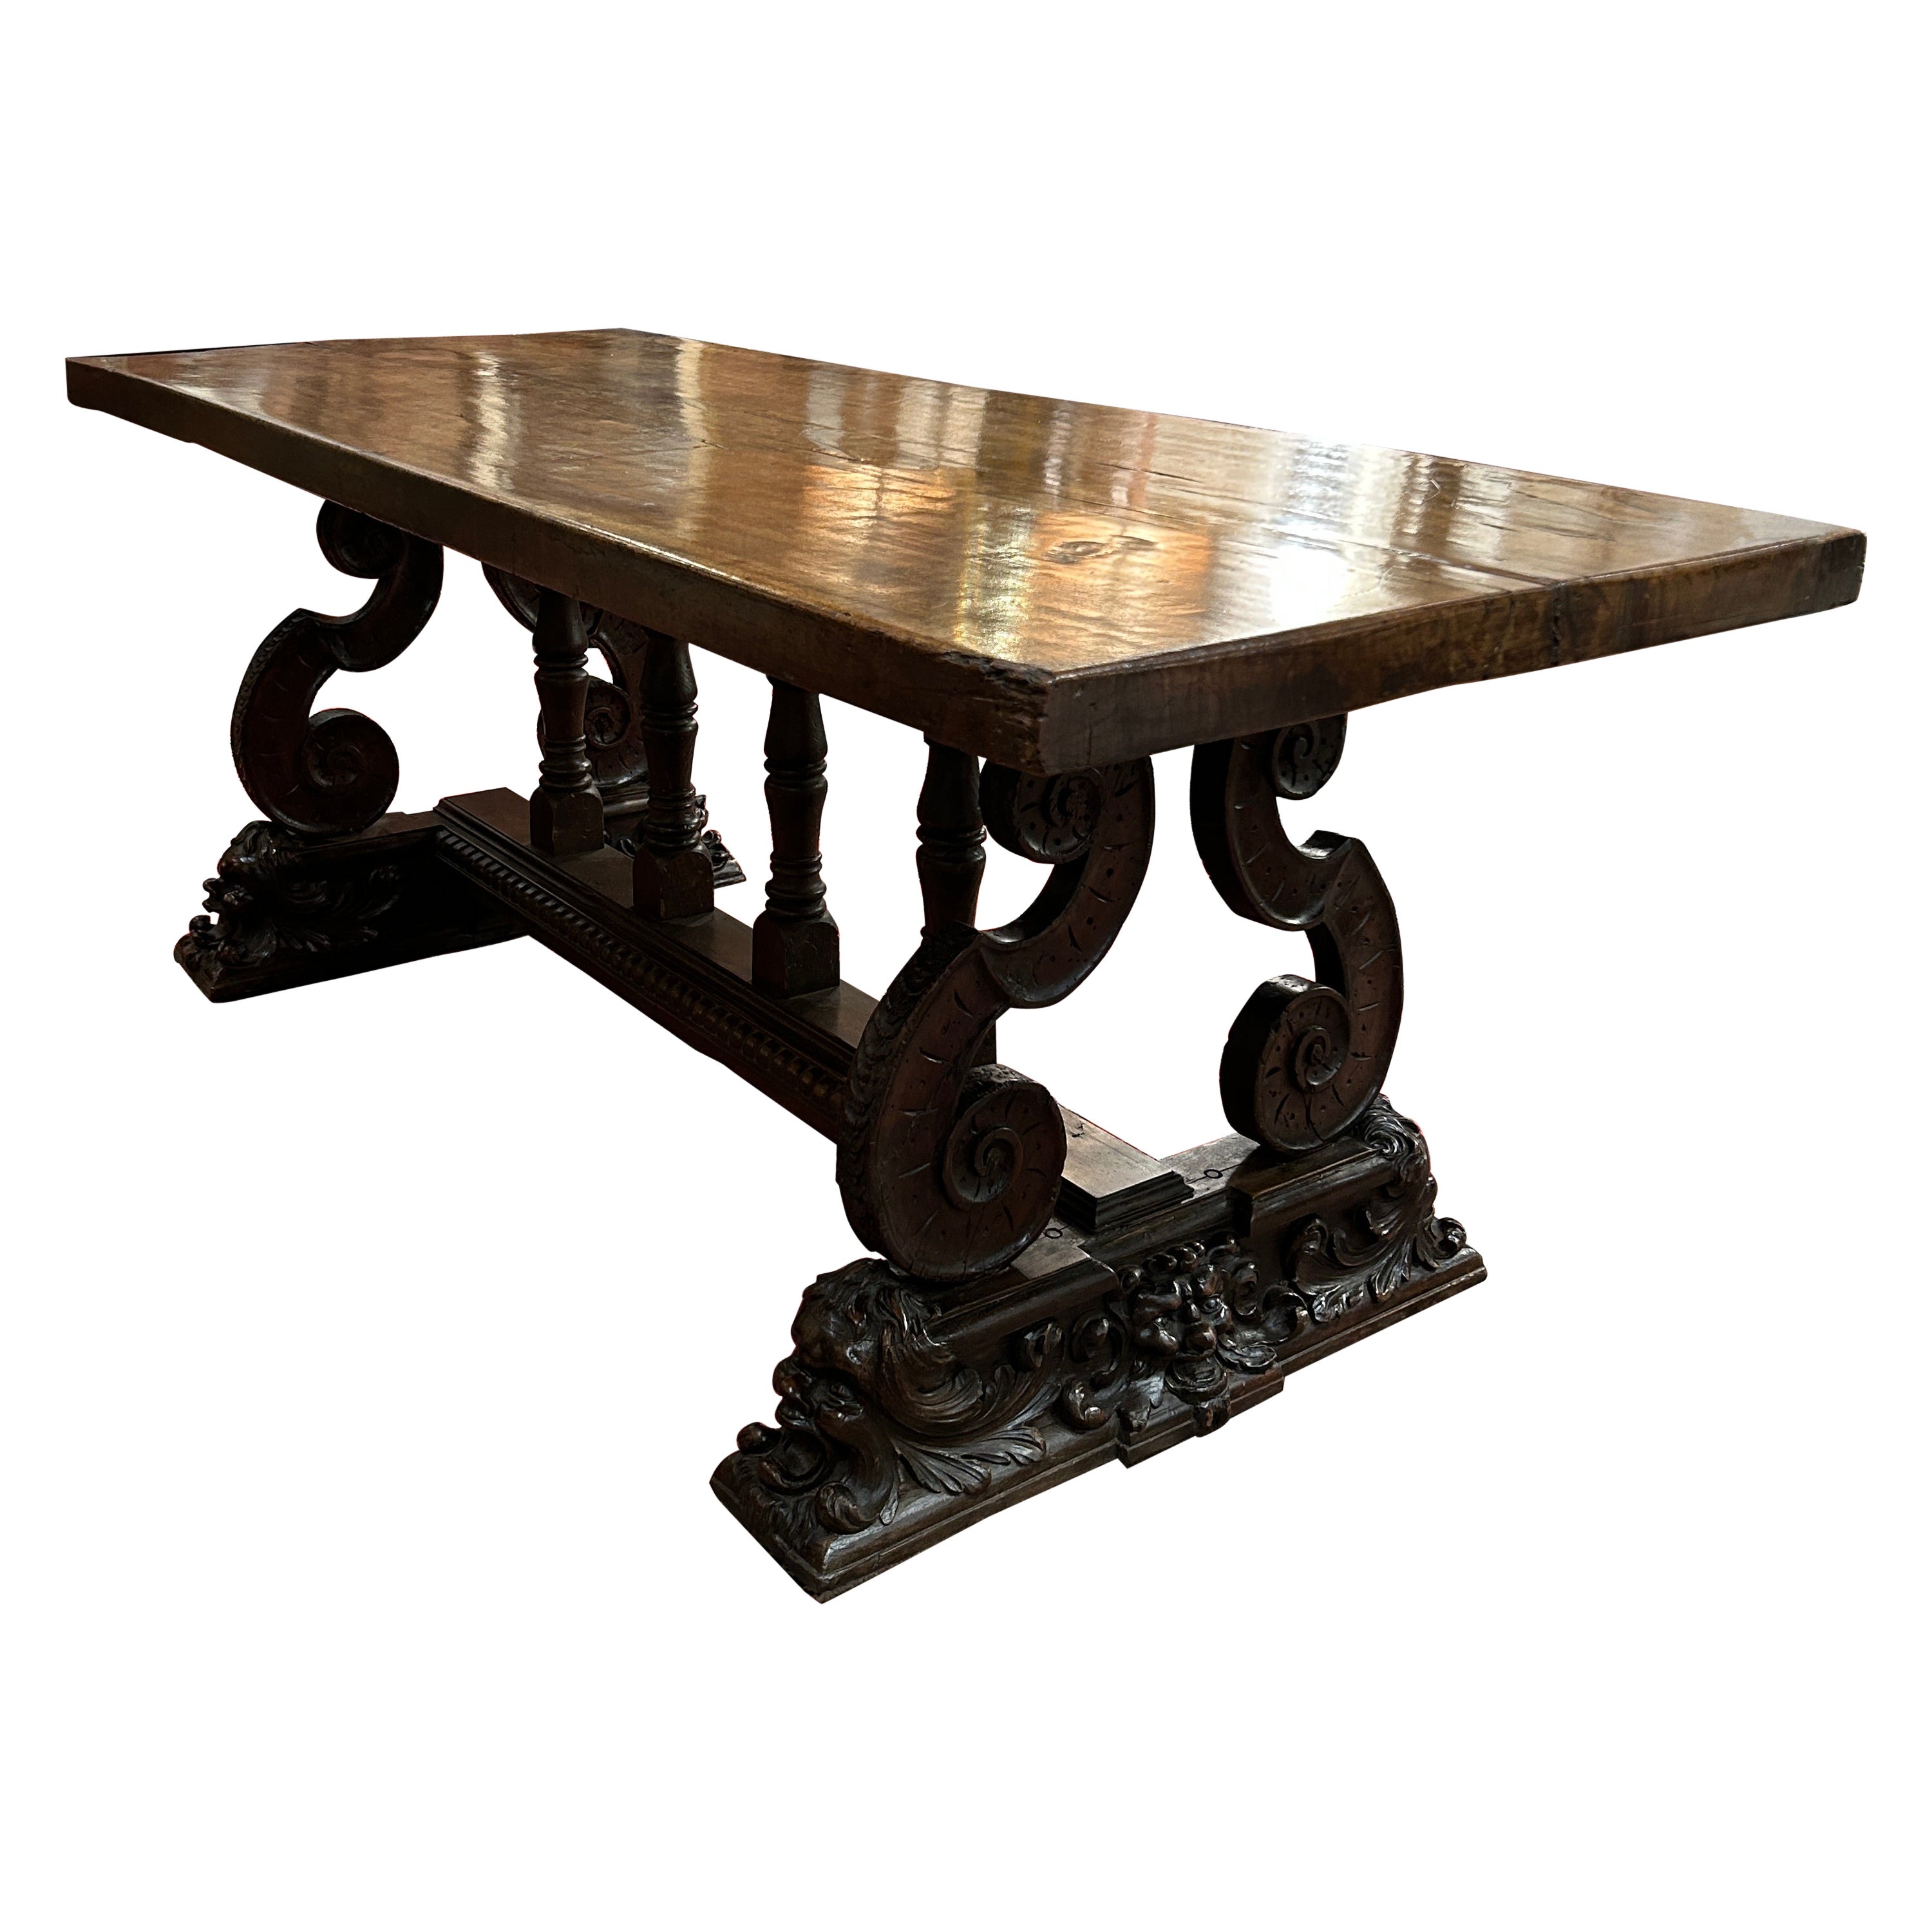 Late 17th Century Italian Baroque Dining Table  For Sale